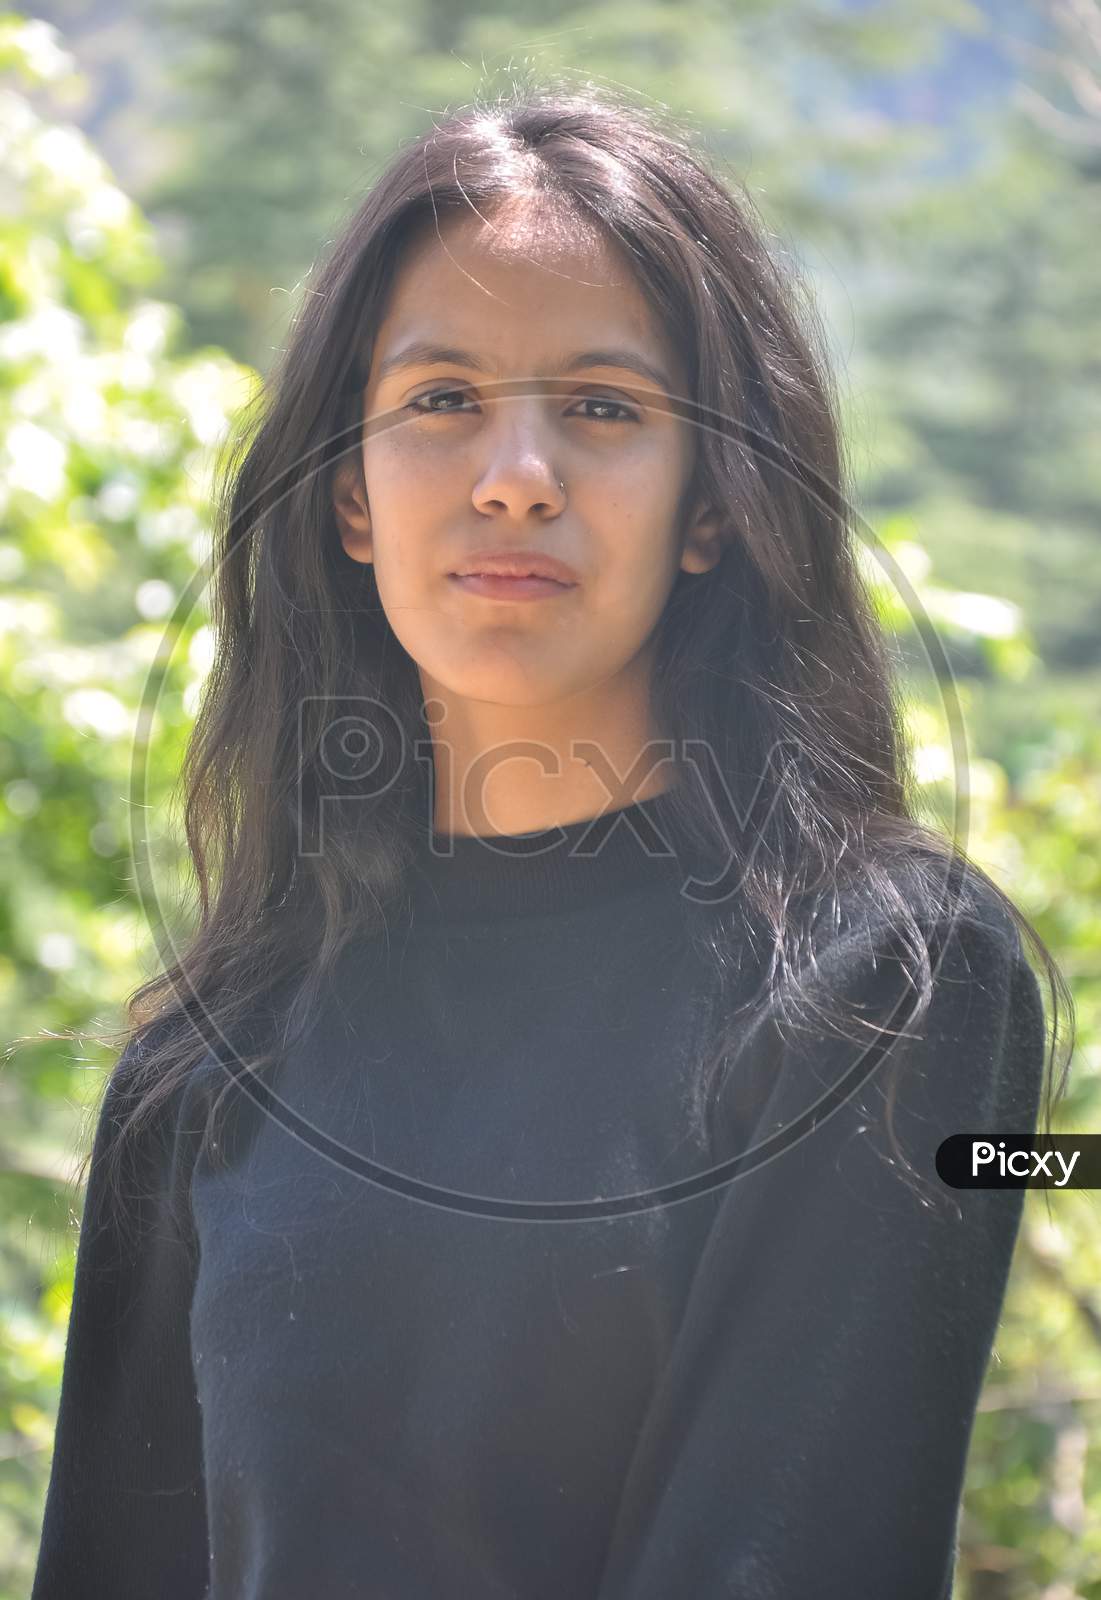 Closeup shot of a beautiful Indian young girl wearing black sweatshirt, posing outdoor in nature with looking at camera